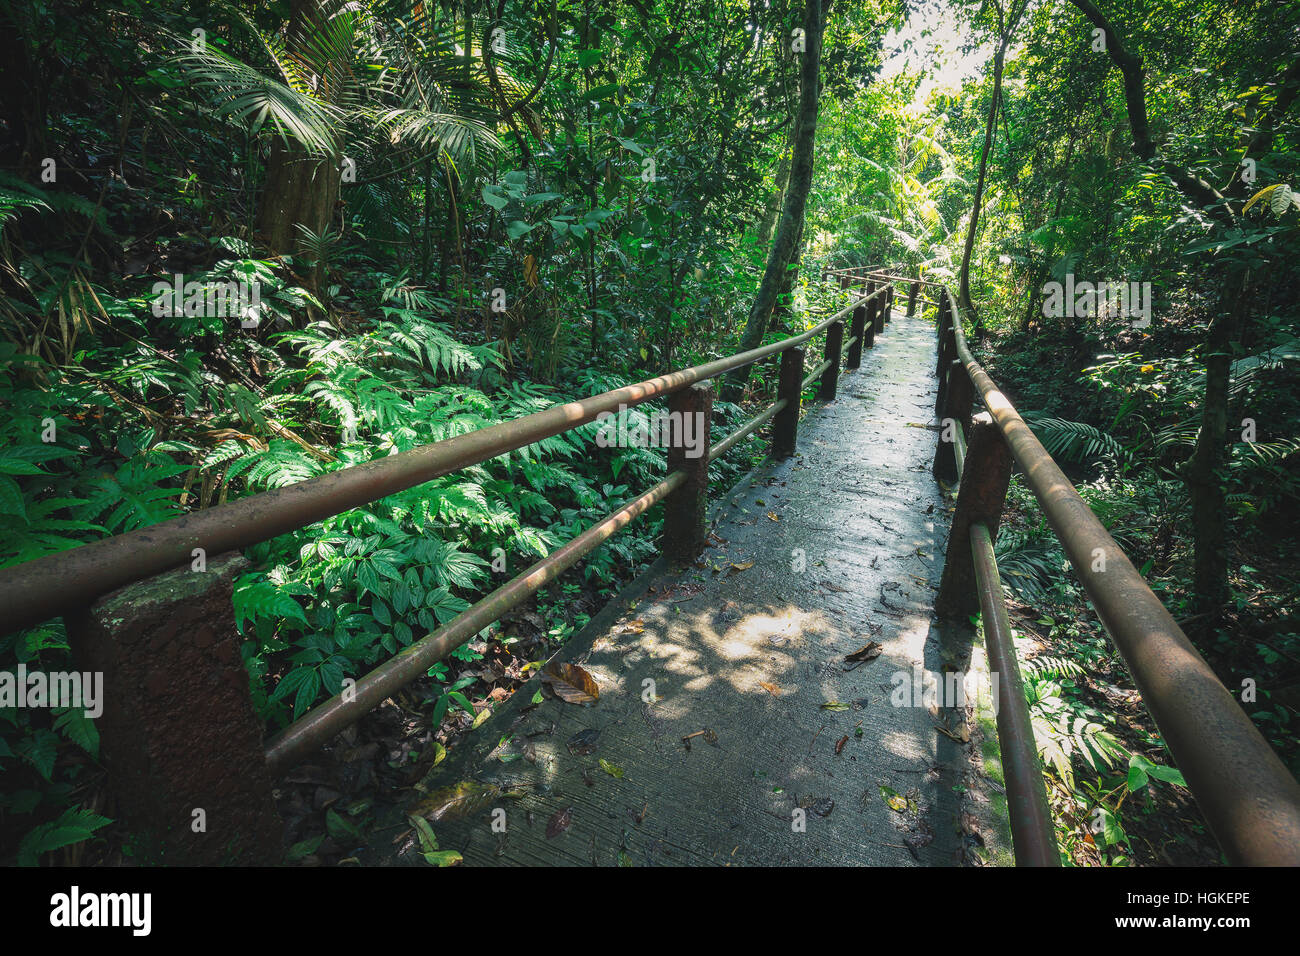 Long walking path wet by rain inside green tropical forest of Thailand's national park Stock Photo